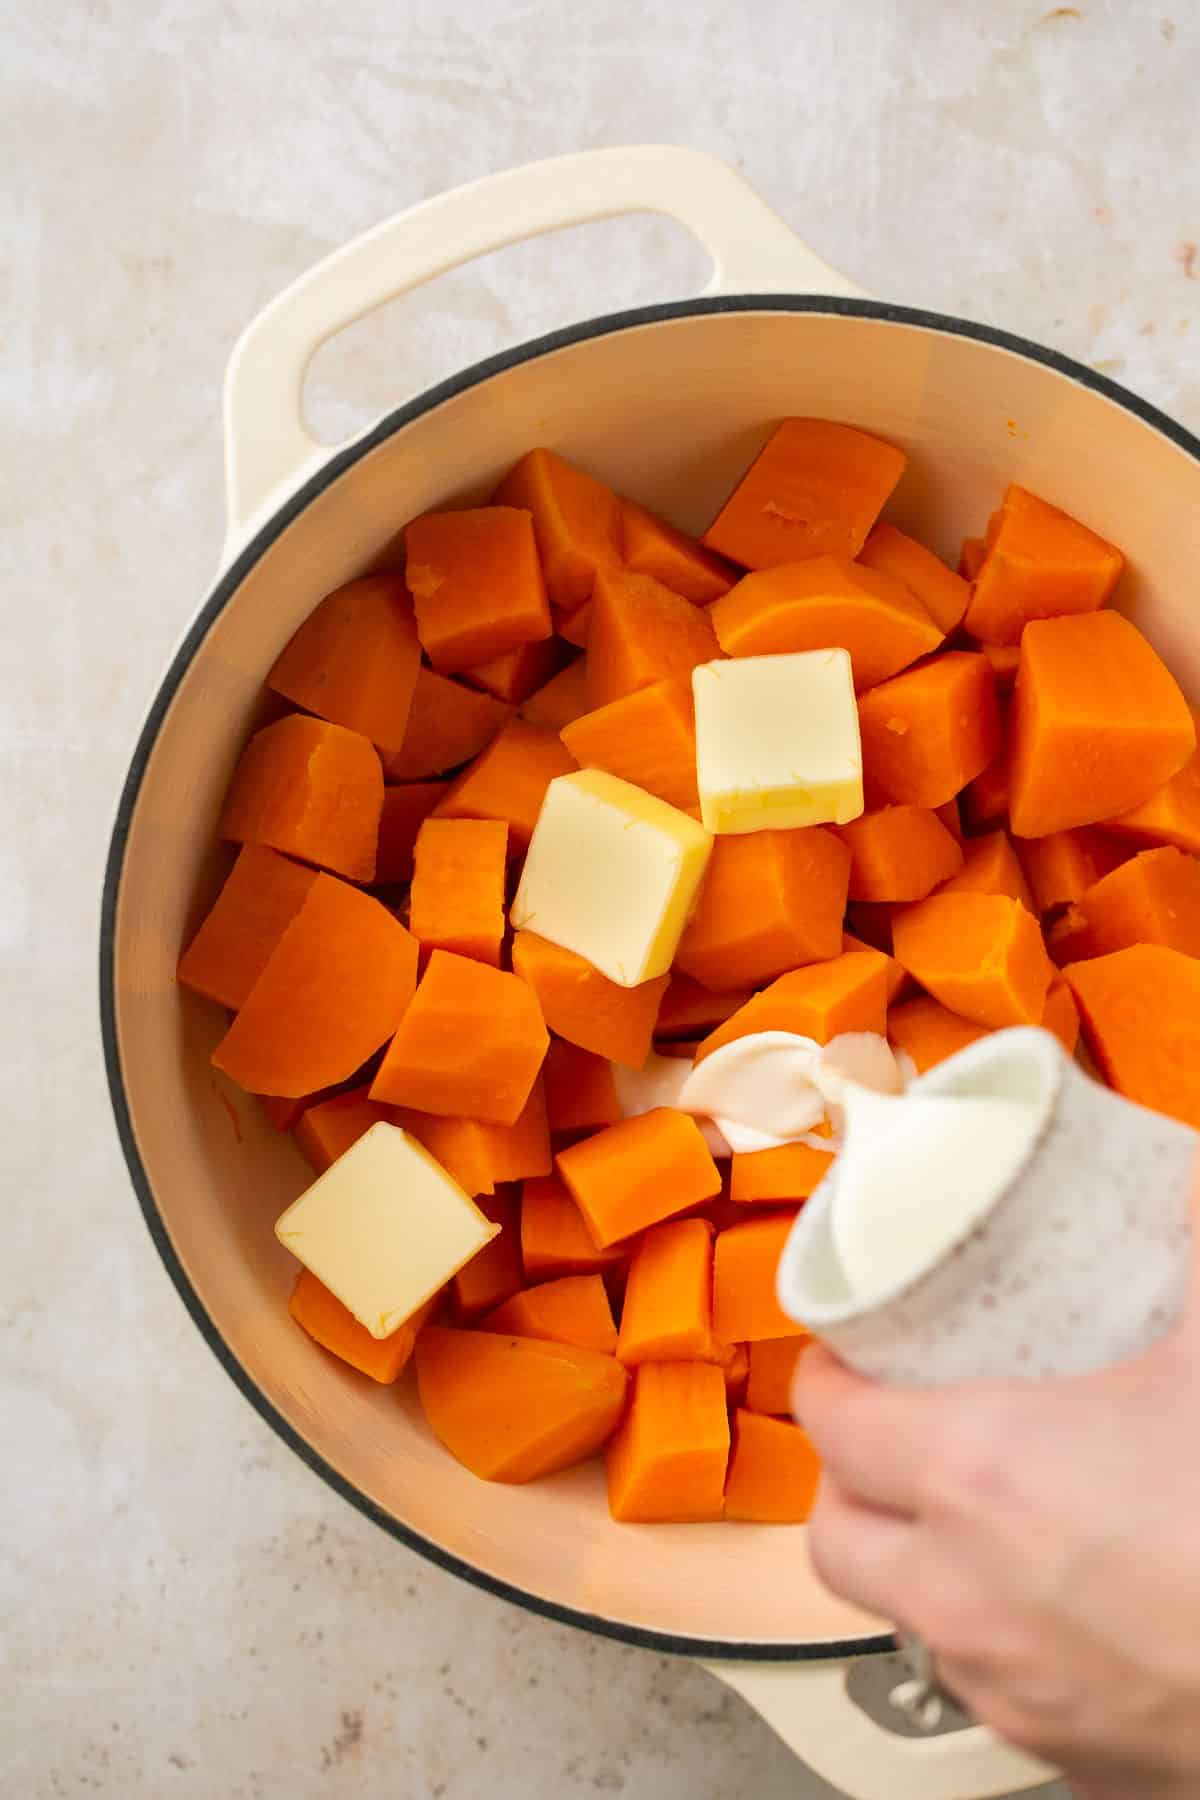 Pouring cream into cubed sweet potatoes.